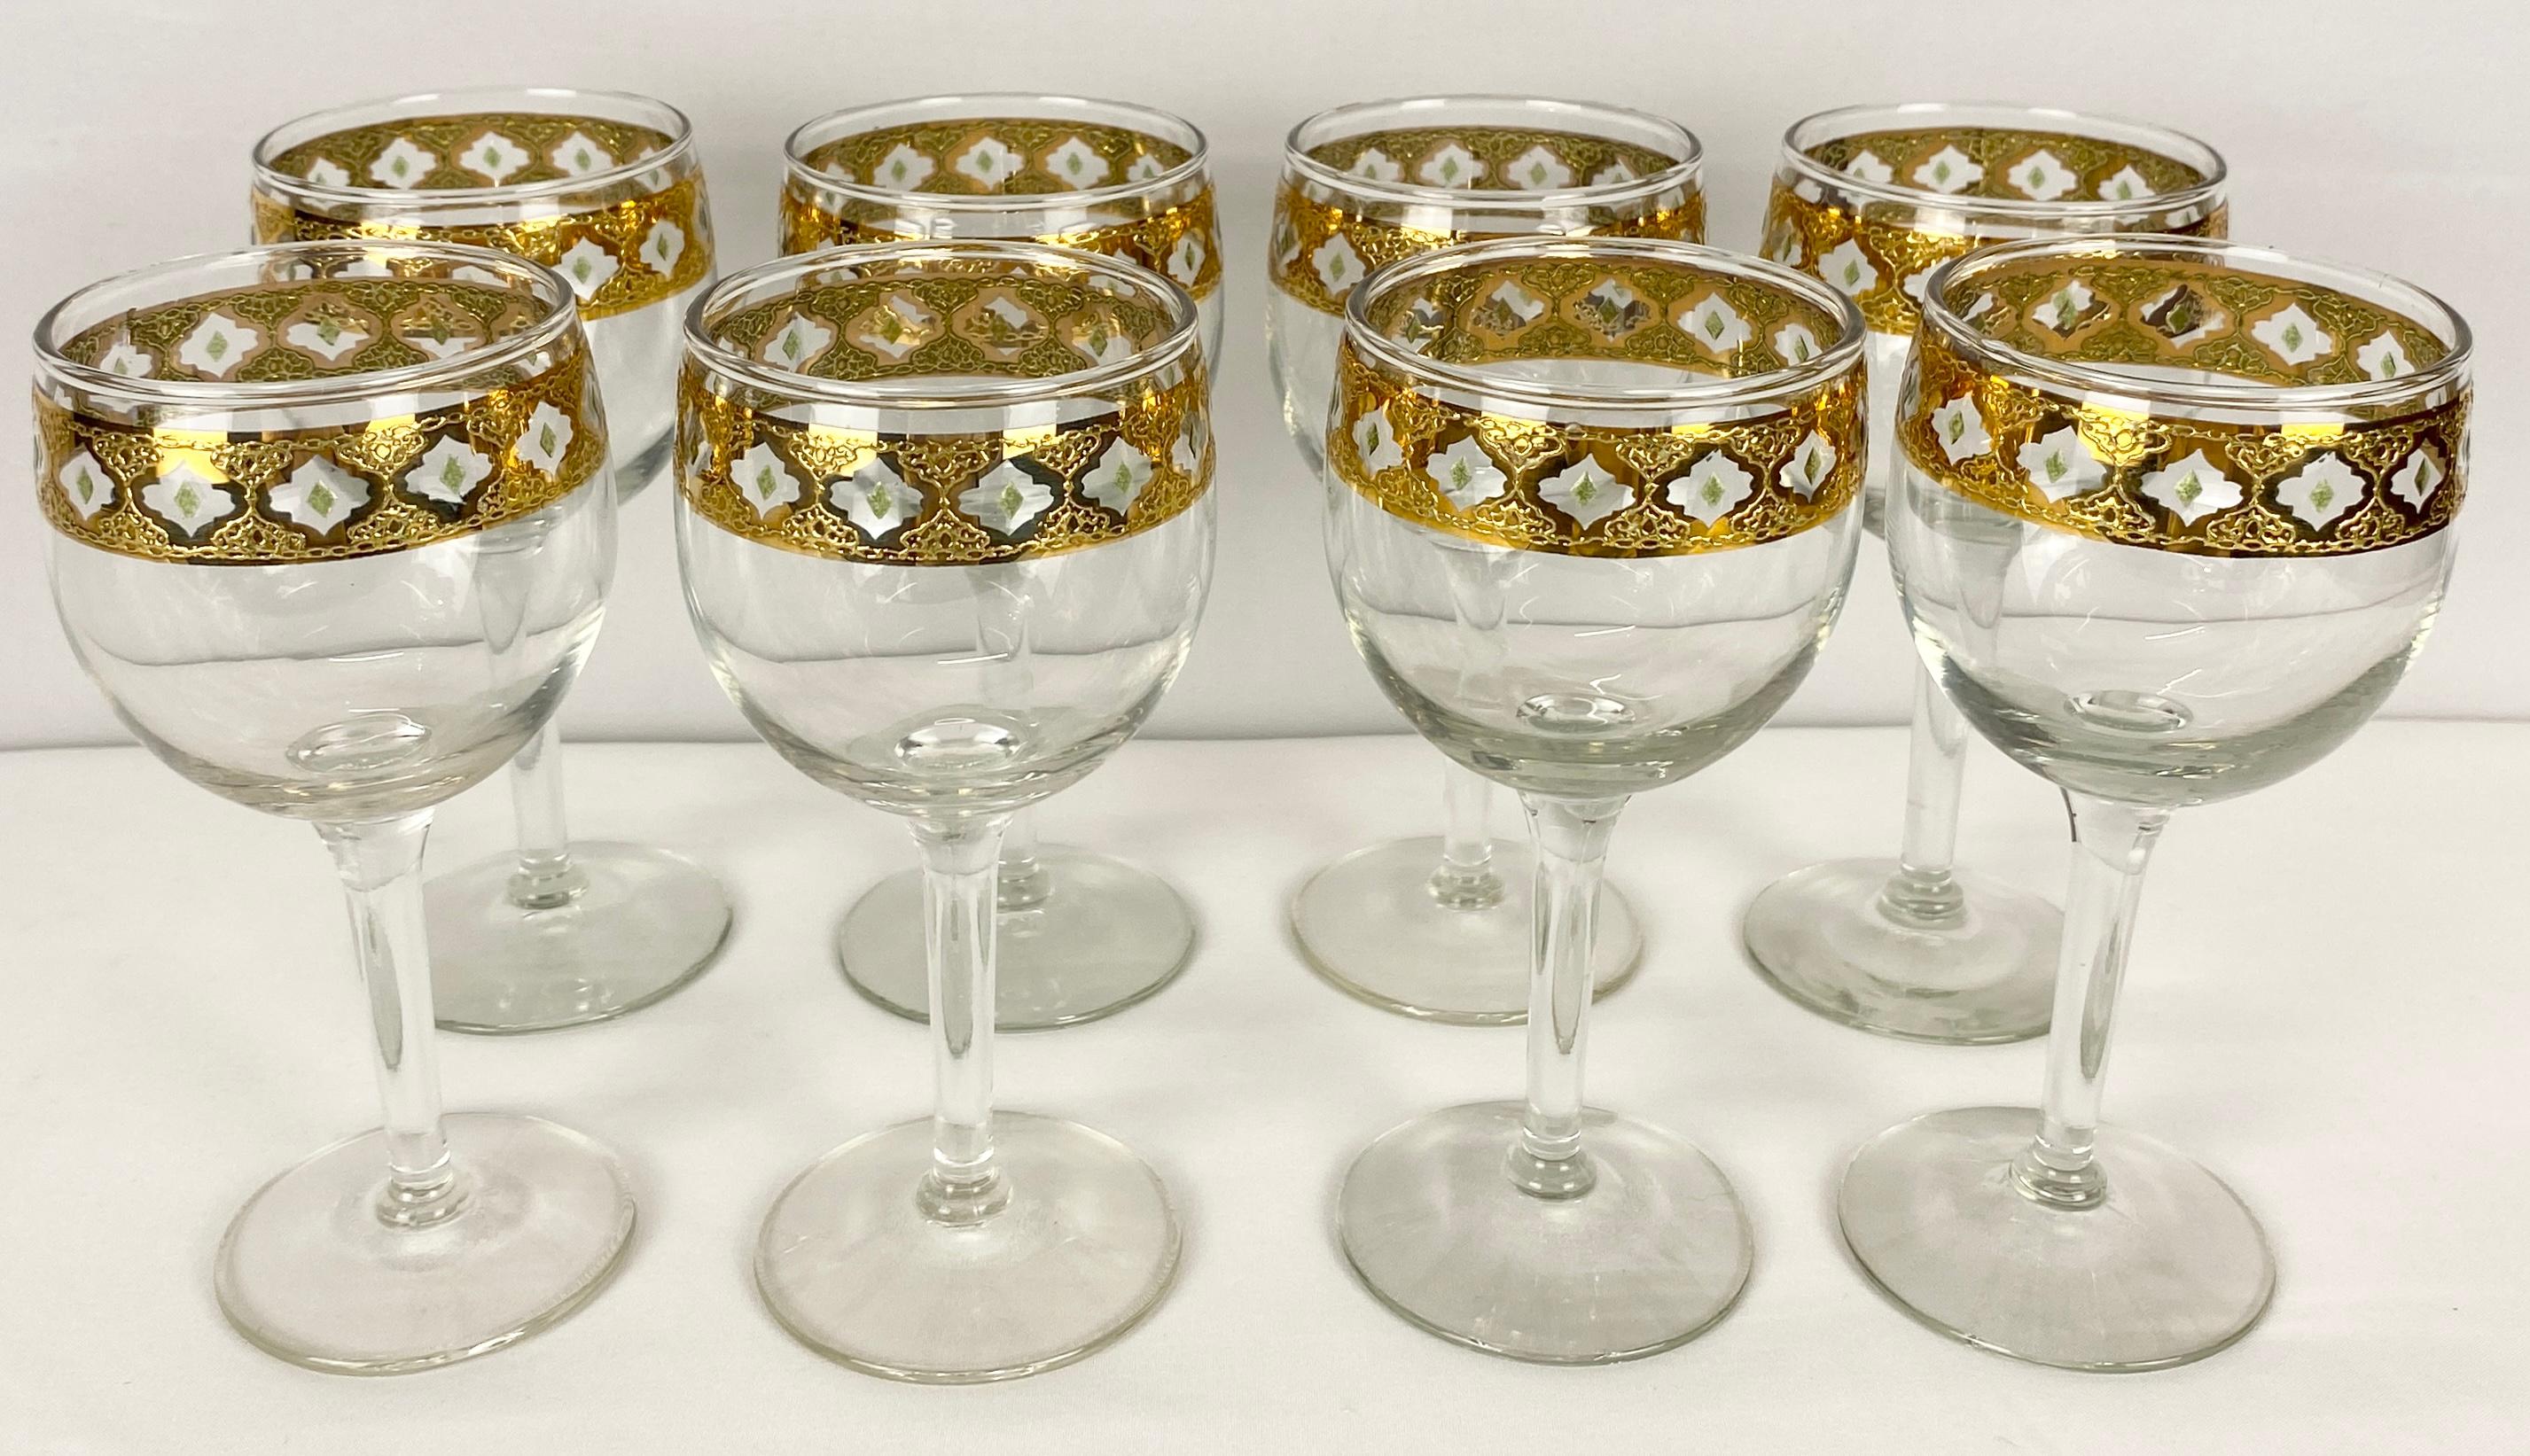 Culver Tyrol 22k gold rim banding wine glasses set of 8. This elegant set of 8 Culver wine glasses which have the Tyrol design in the wide 22k gold banding on the top, adorn the classic Culver design. 

A perfect addition to your home, these Culver